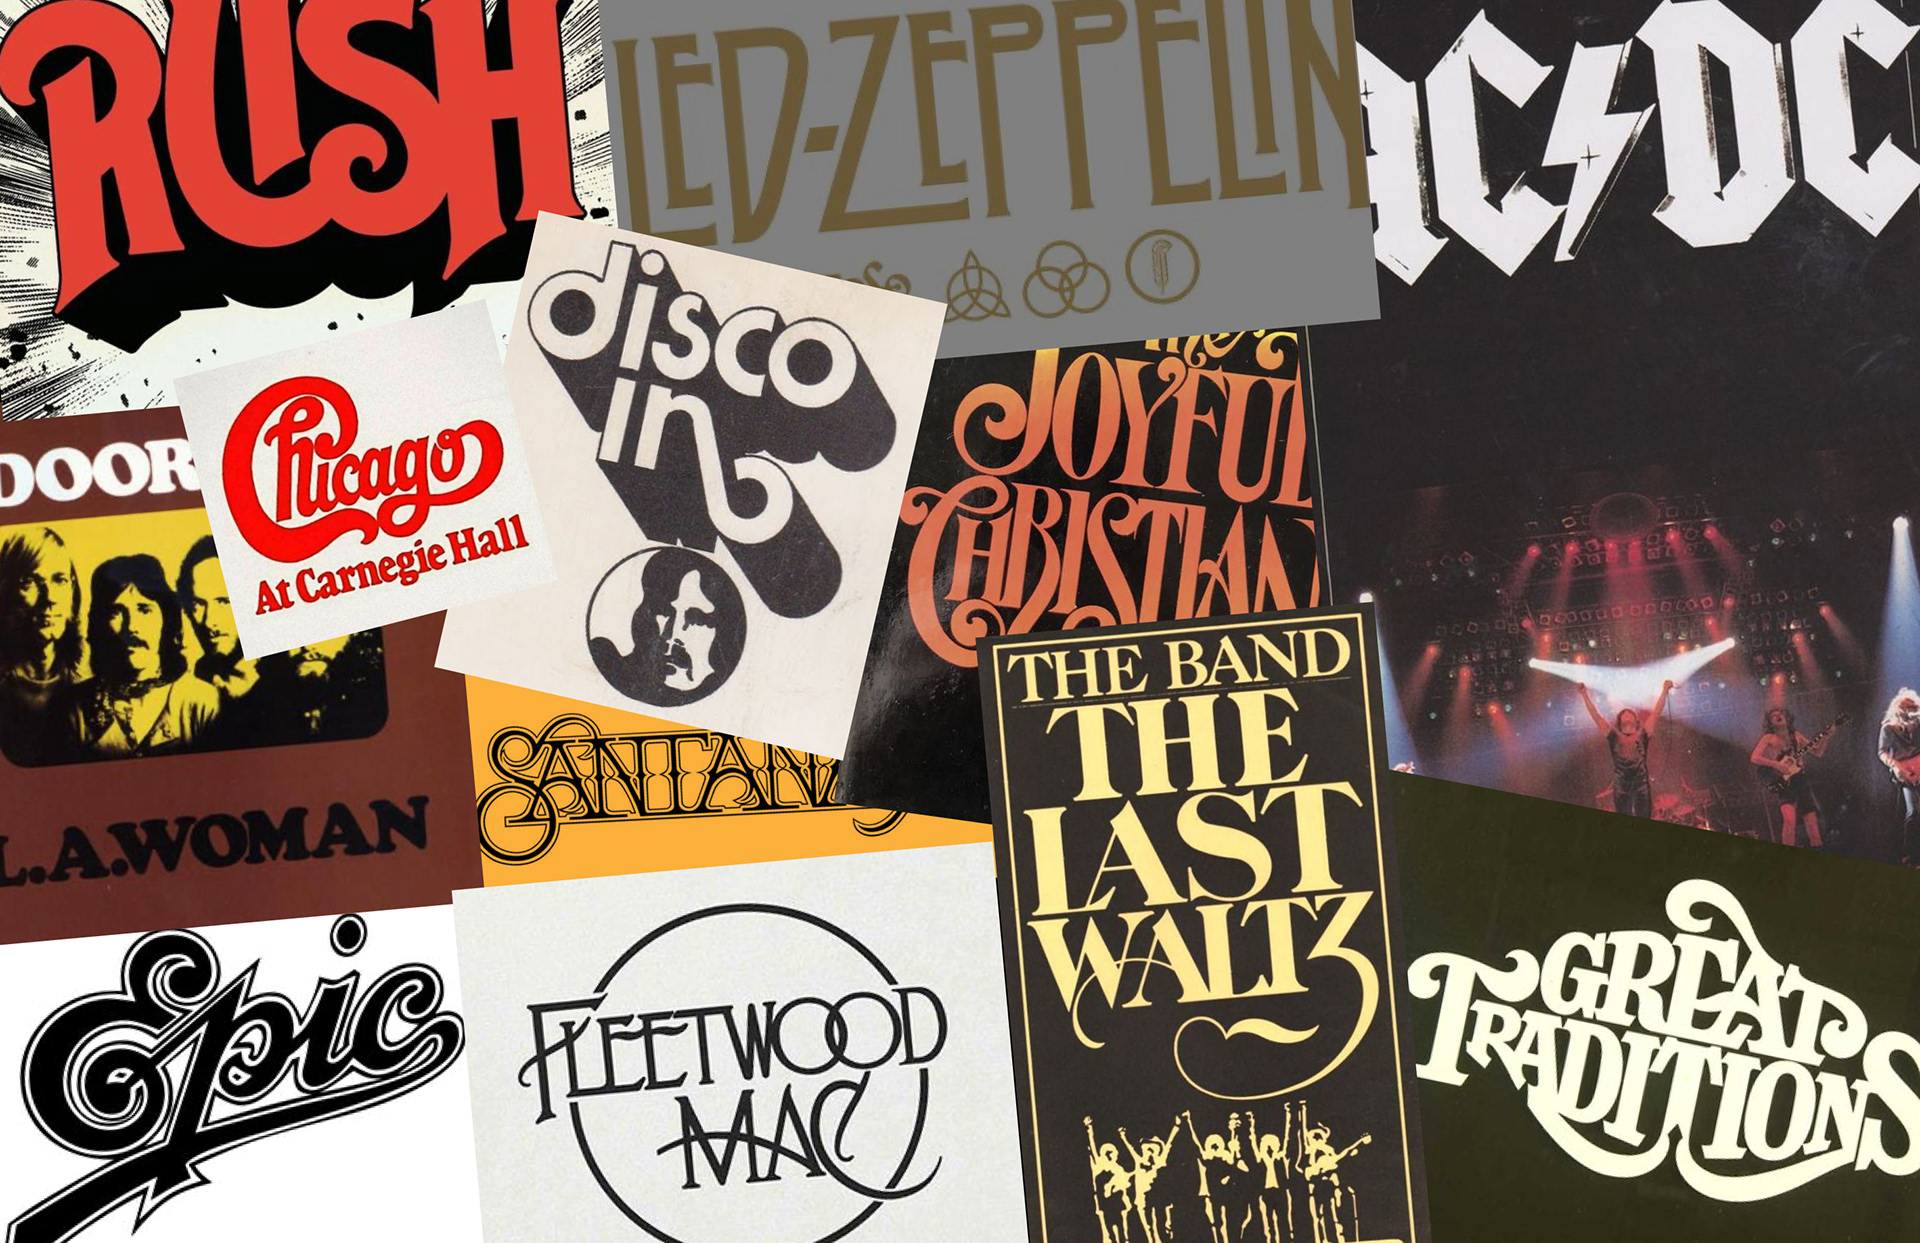 classic rock band logos collage